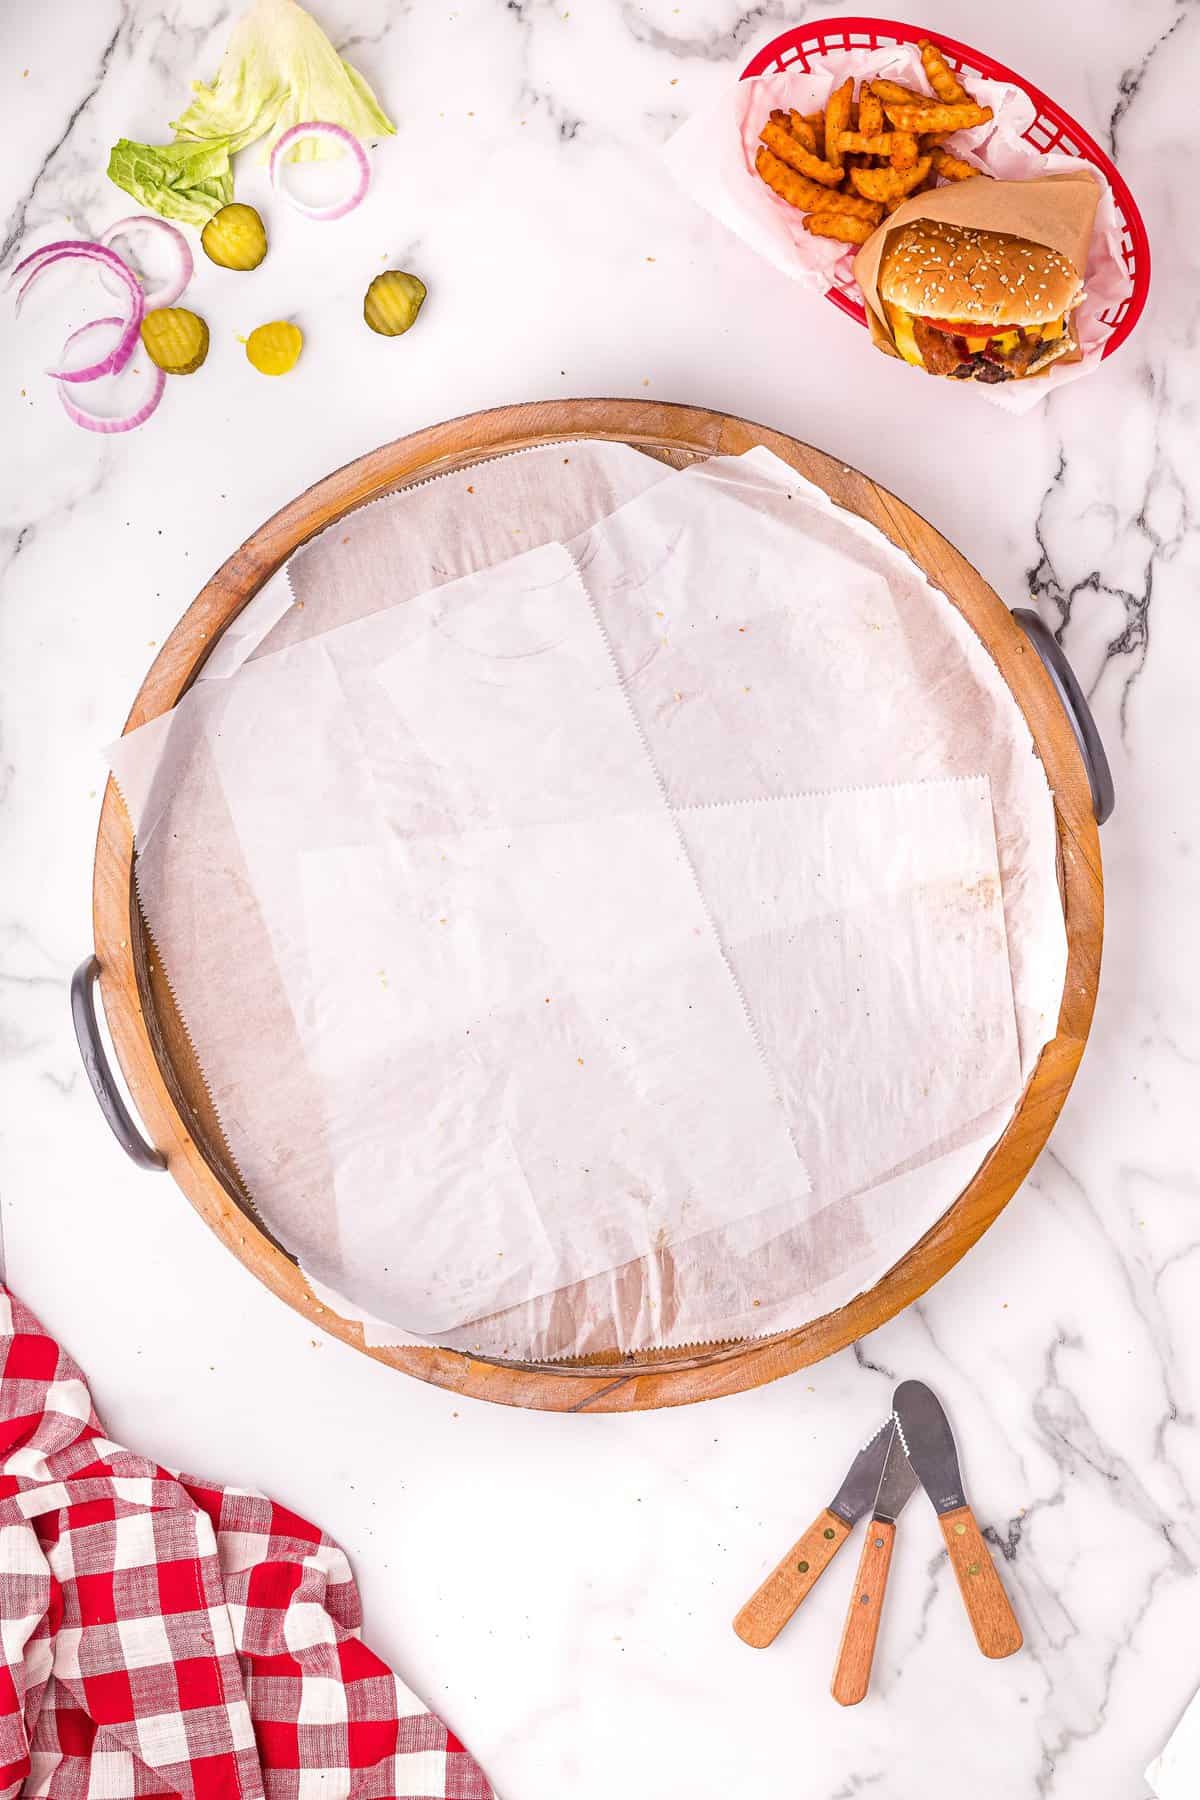 Overhead image of round wood platter with parchment paper